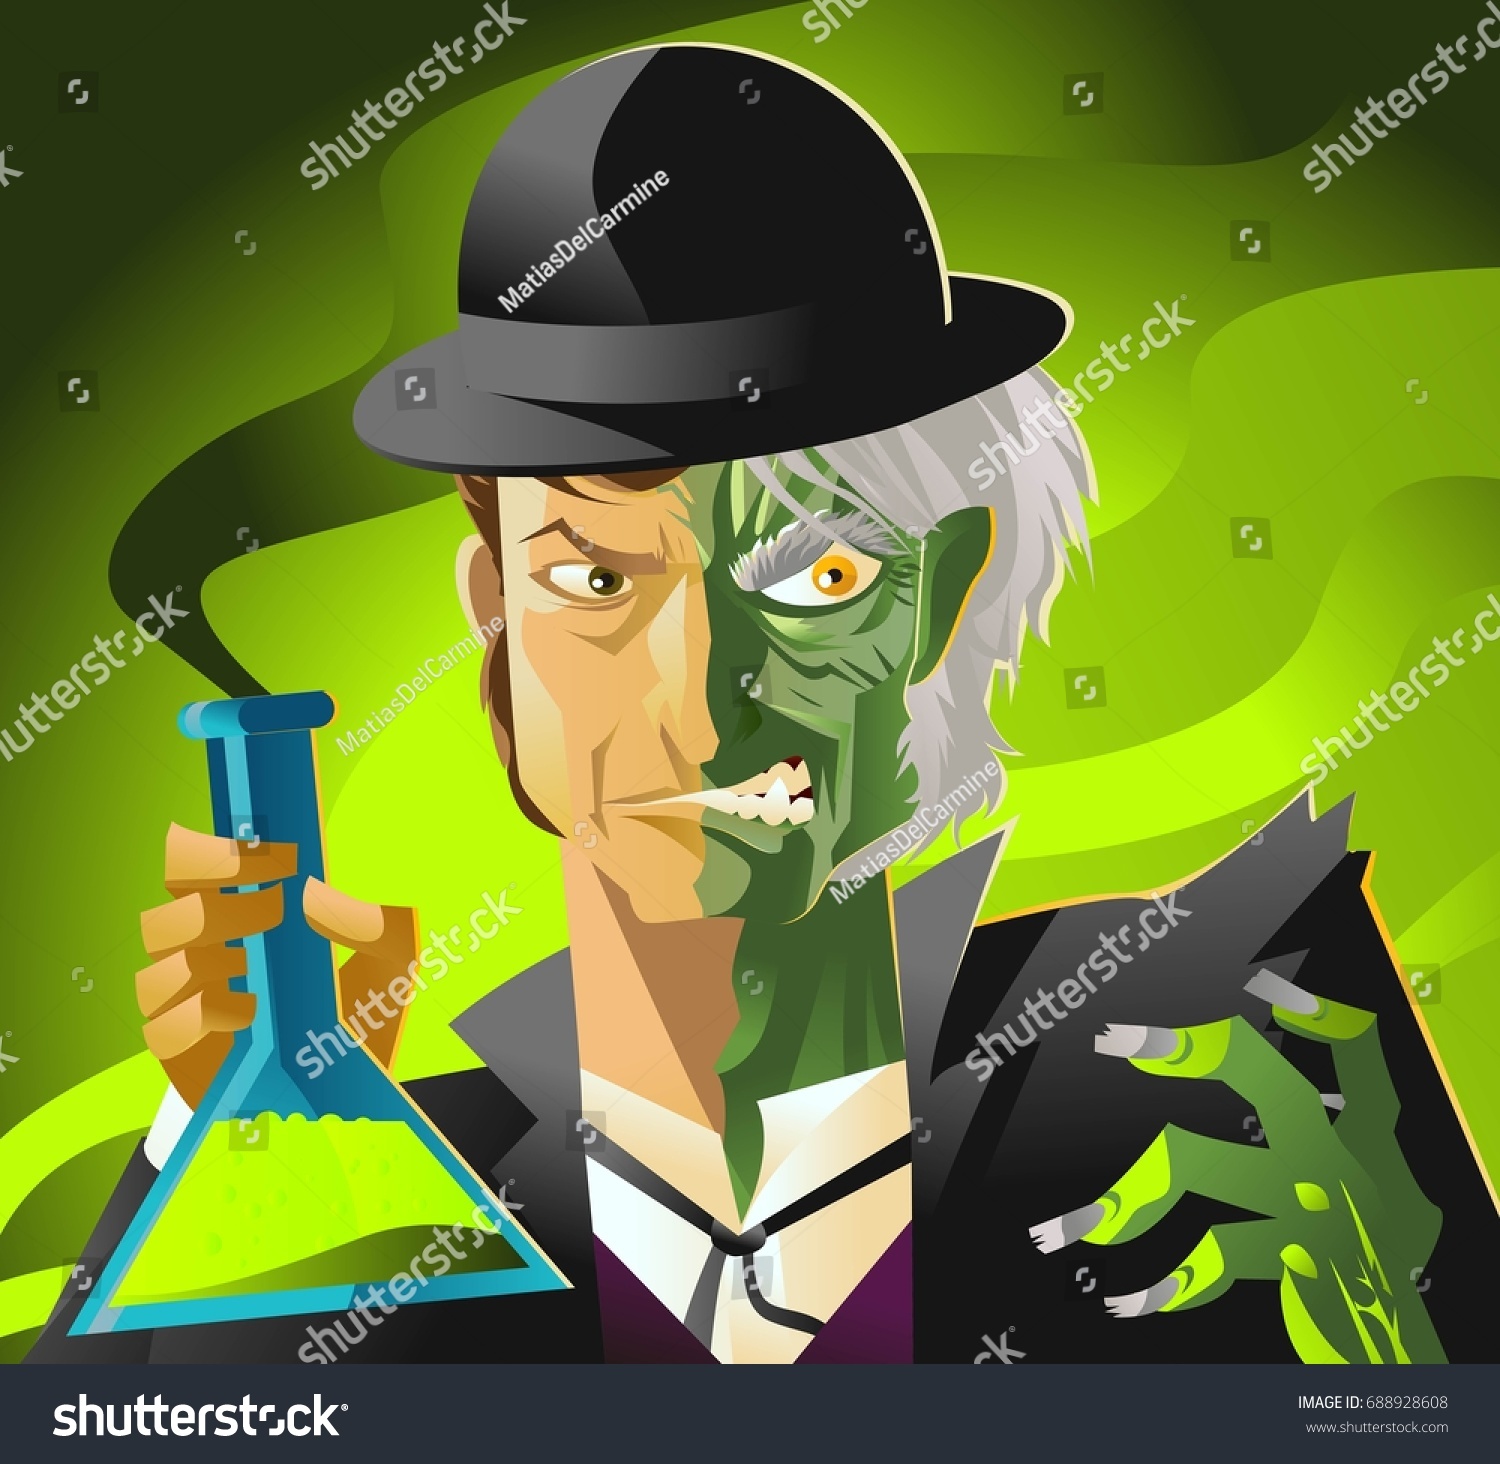 SVG of doctor jekyll and mister hyde monster transformation with green potion svg